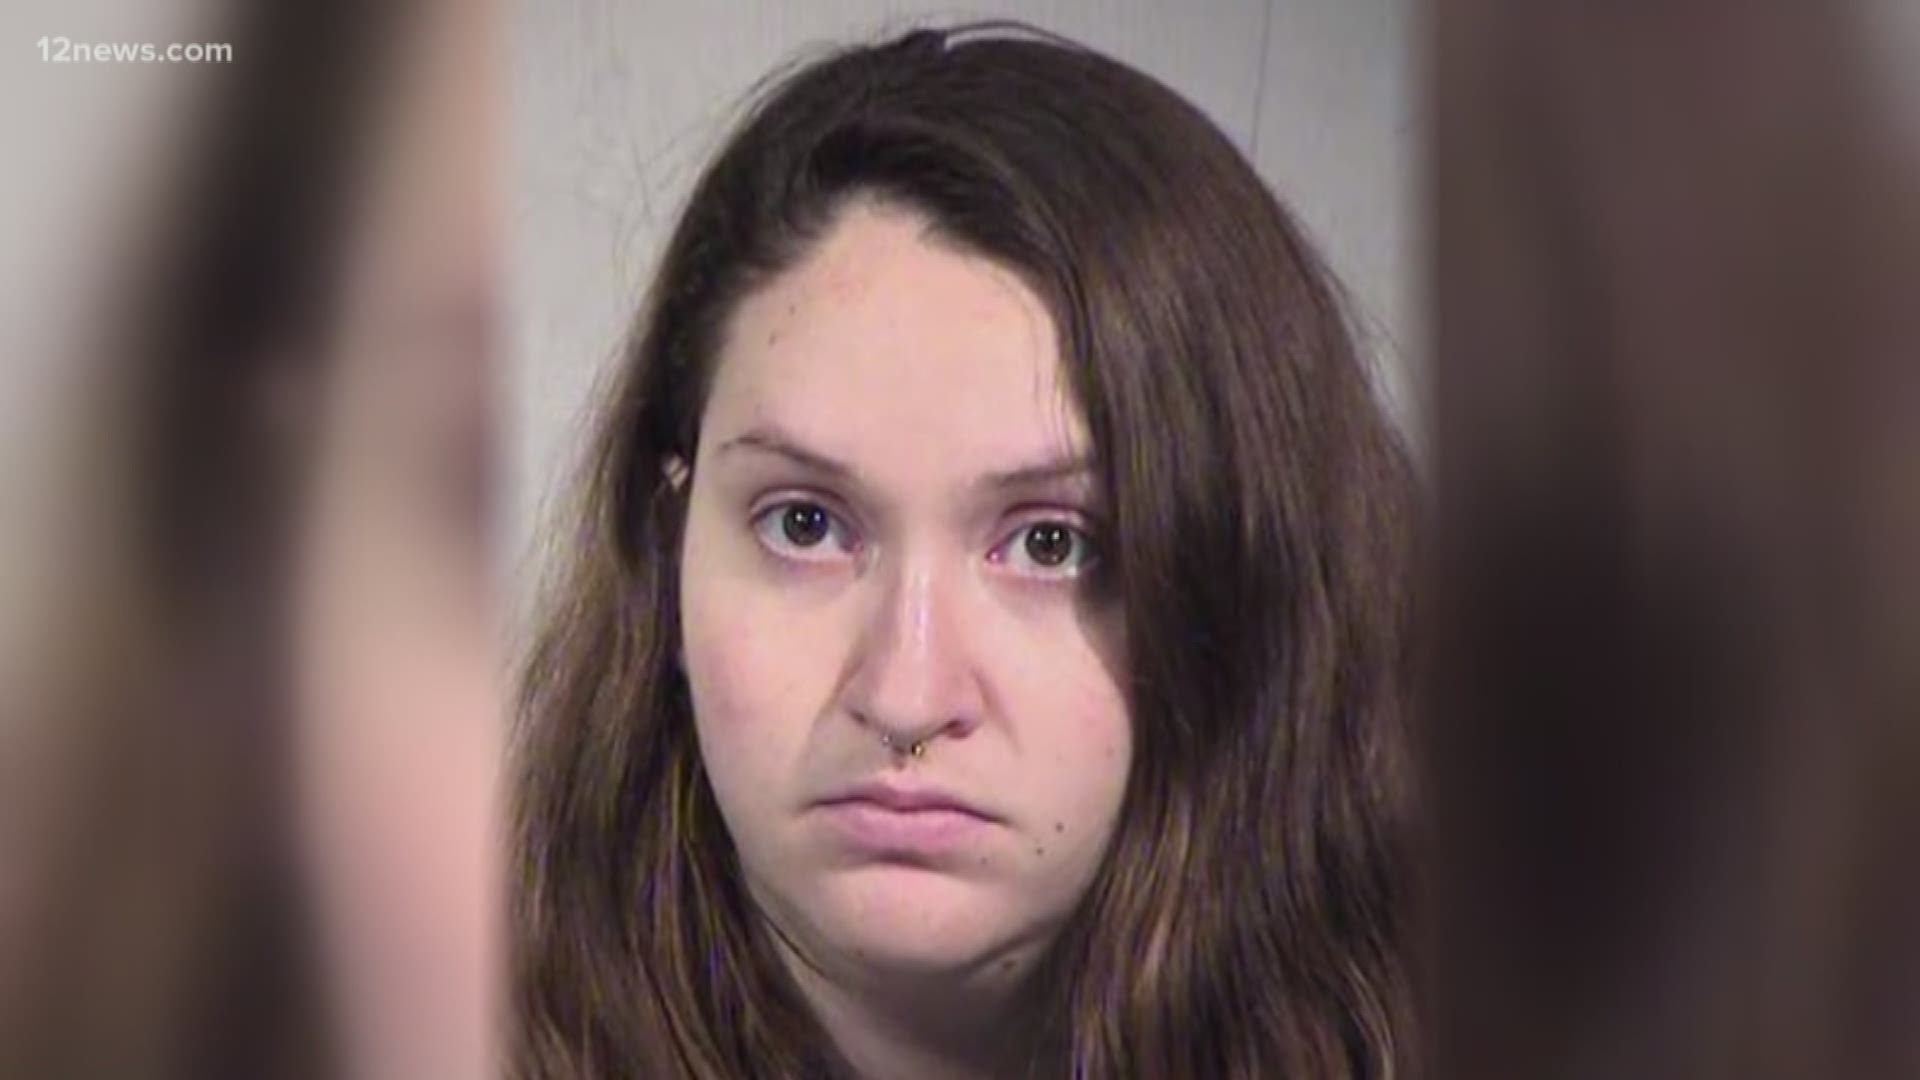 Samantha Vivier is the 22-year-old woman who gave birth to a baby that was found dead at an Amazon facility in the Phoenix area. Vivier told police she didn't know she was pregnant, and she gave birth to a still-born baby. Prosecutors recommended she be released.